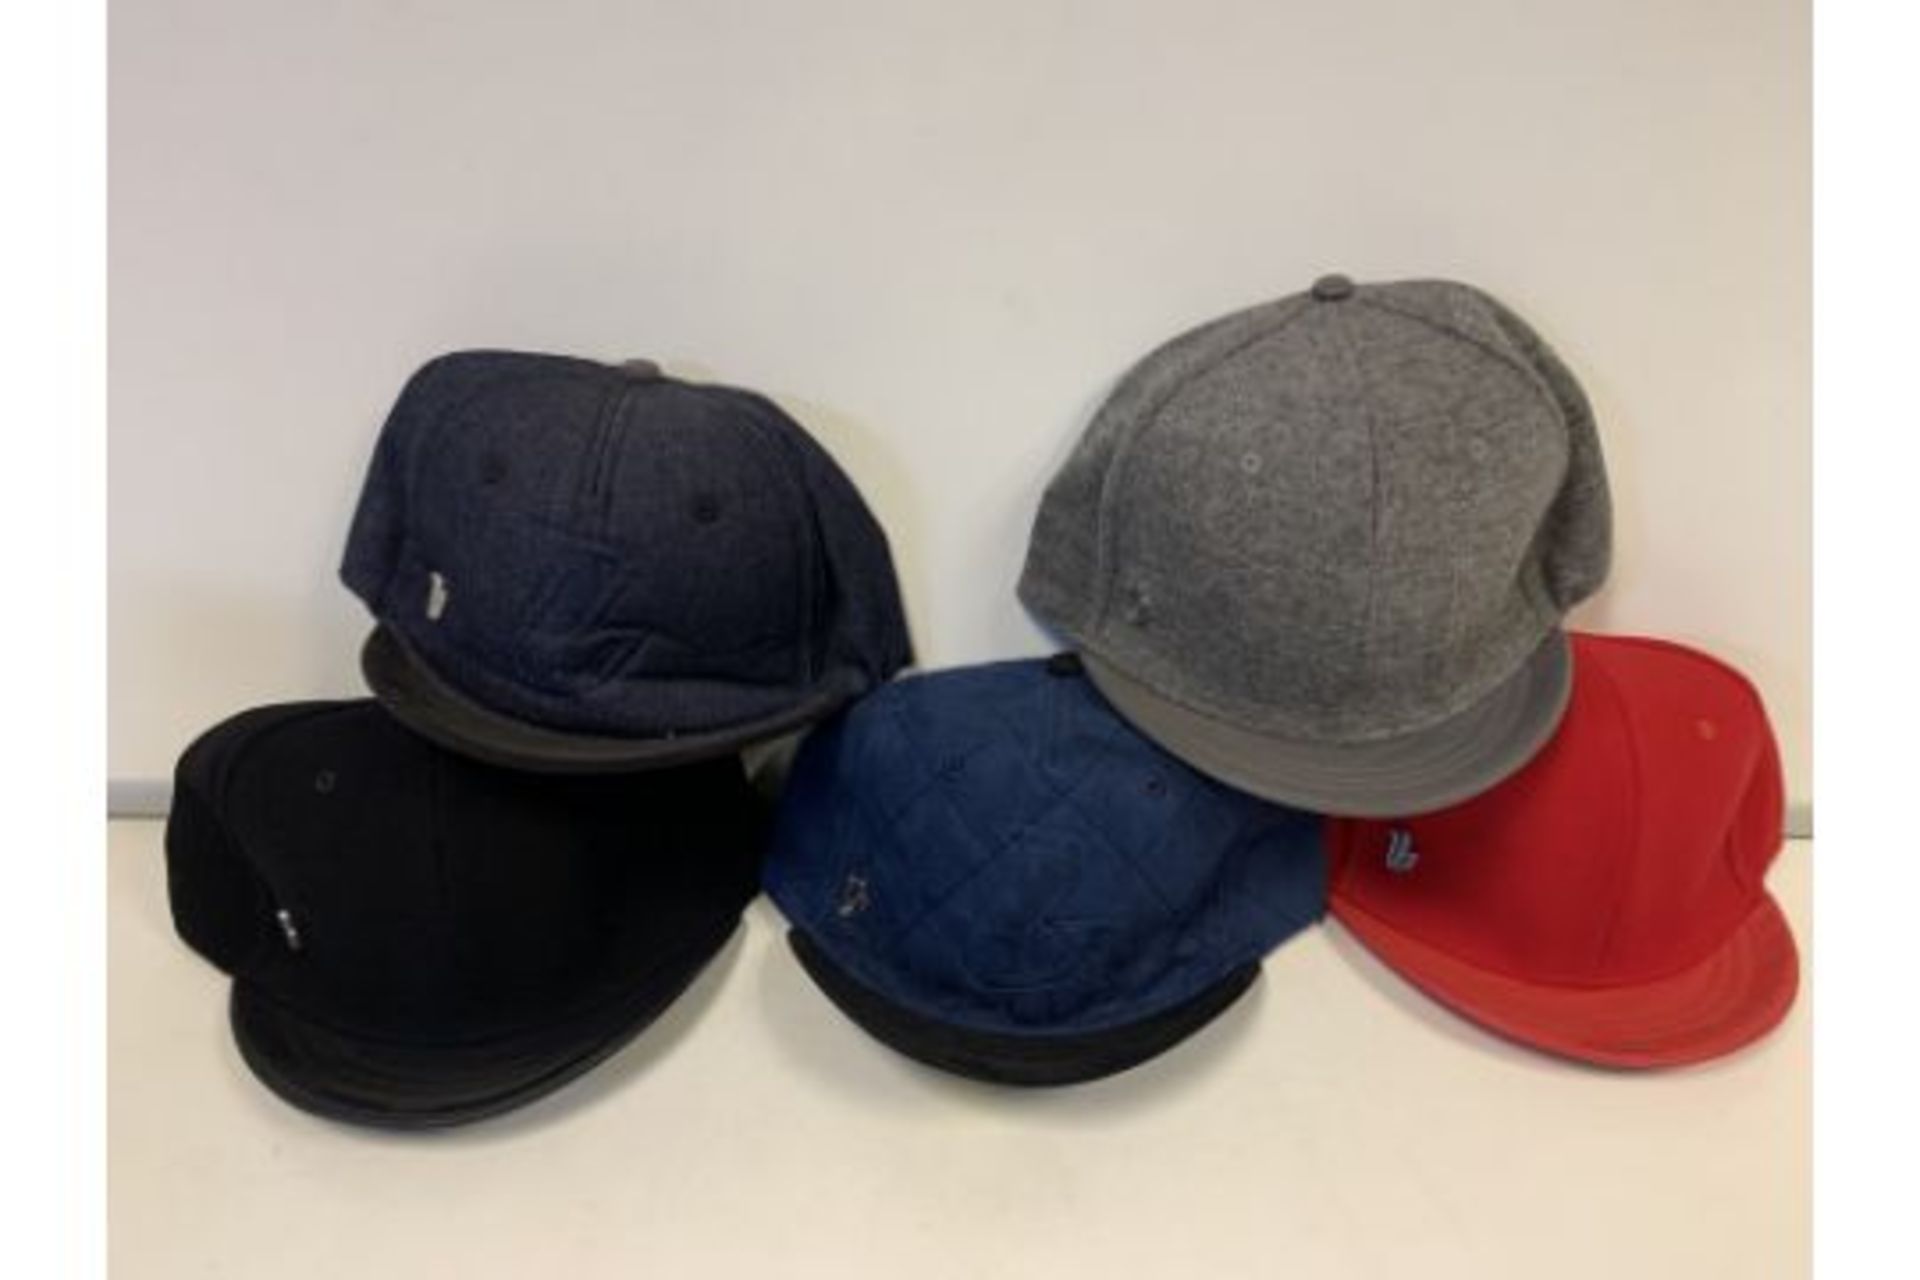 100 X BRAND NEW FASHION CAPS IN VARIOUS STYLES S1